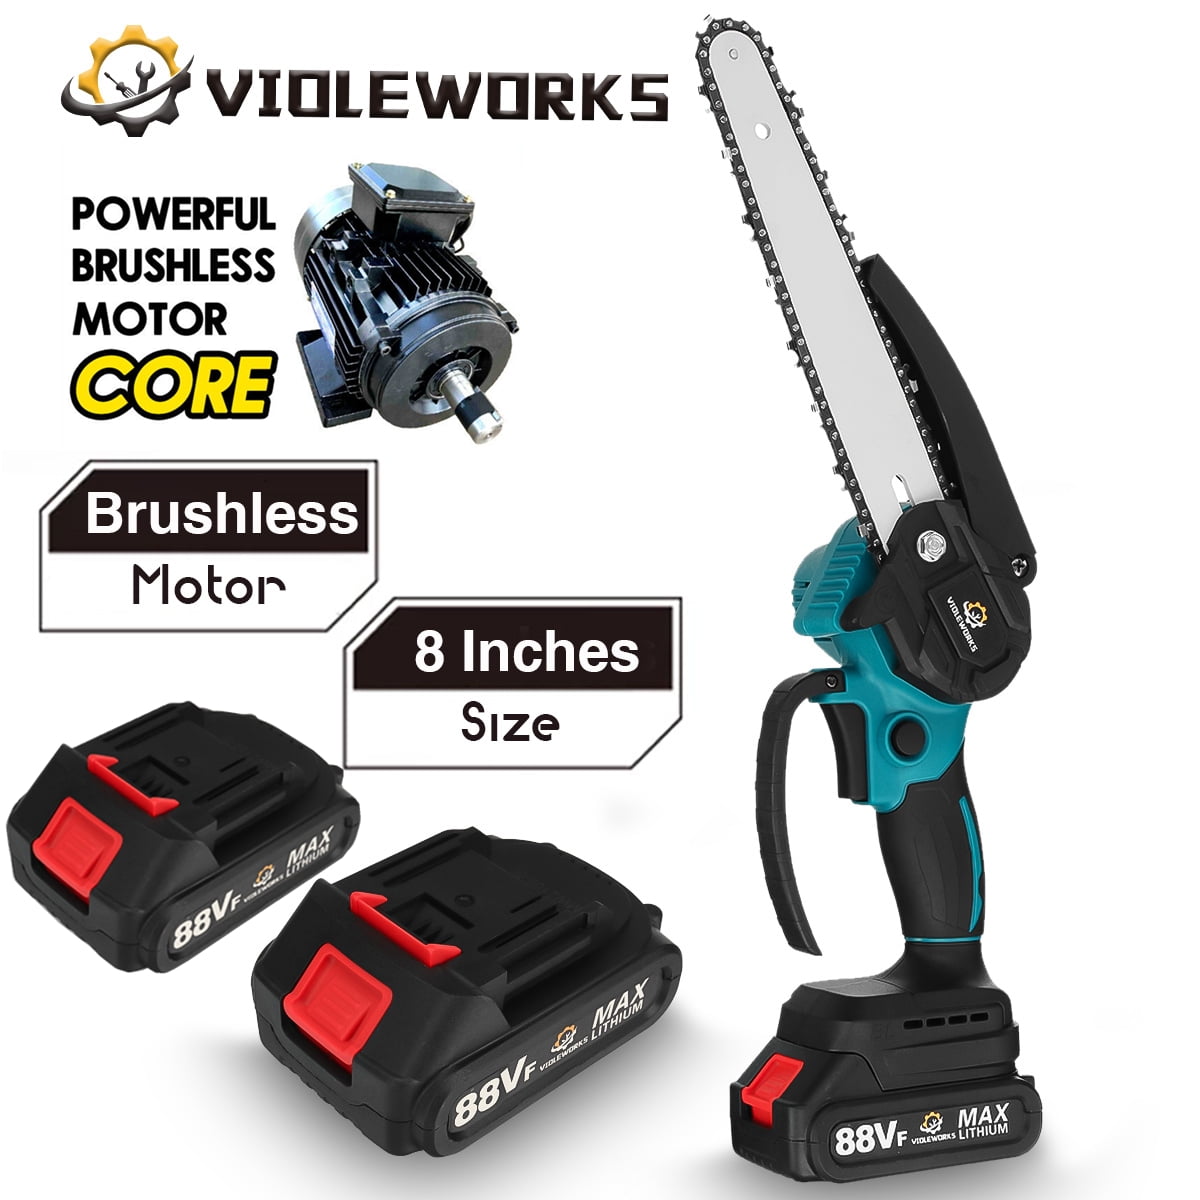 VIOLEWORKS Inch Electric Saw Brushless Mini Chainsaw Cordless, W/ Two  Batteries 2x1.5Ah for Tree Branch Wood Cutting, Blue